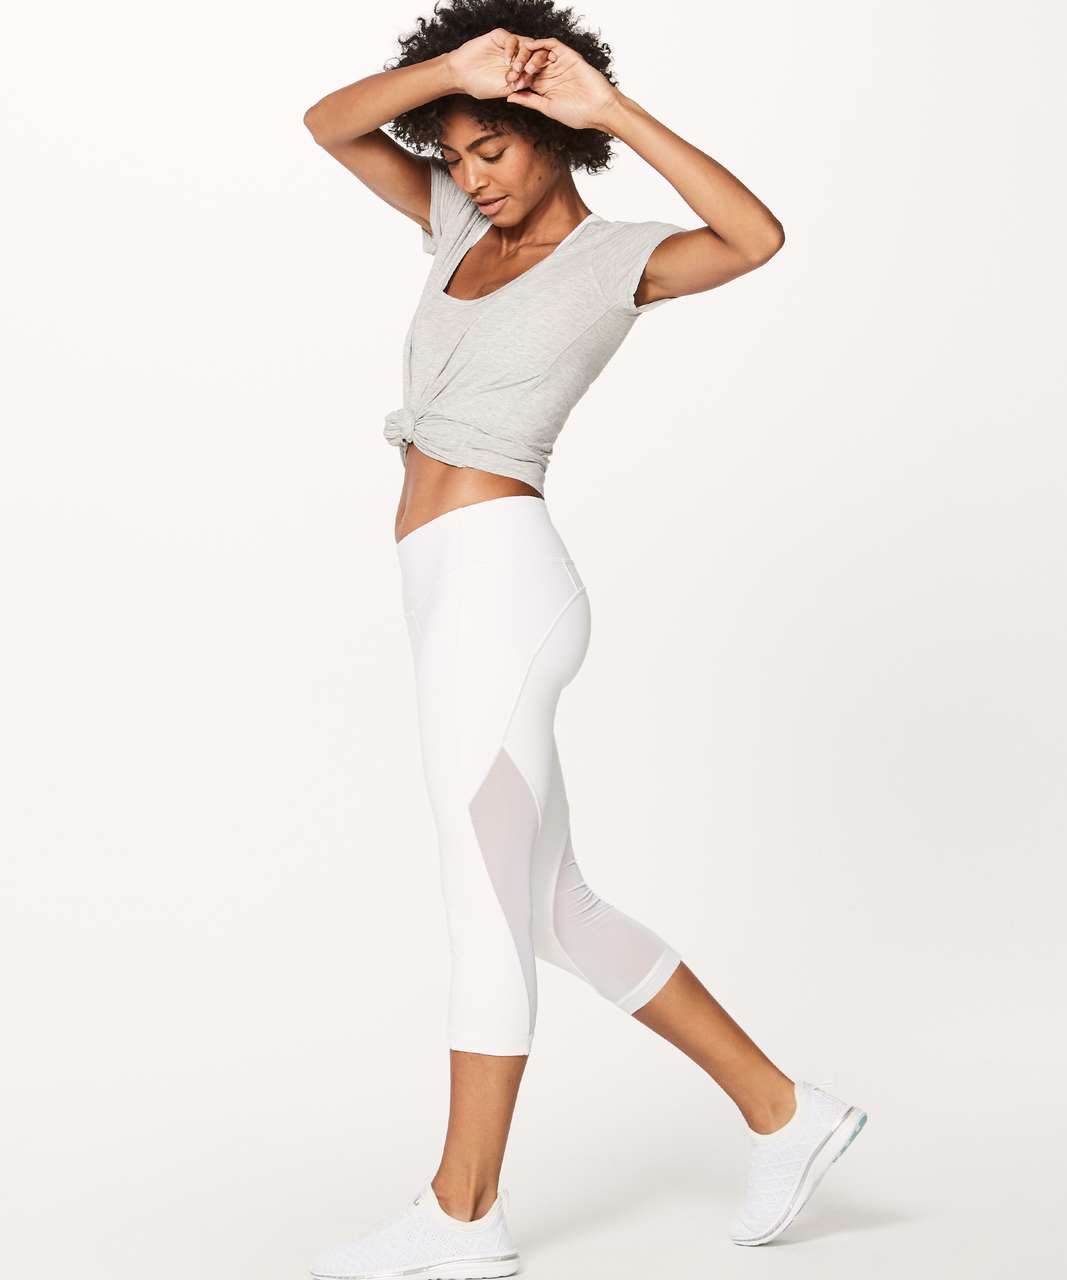 Lululemon Sweat Your Heart Out Crop (21 